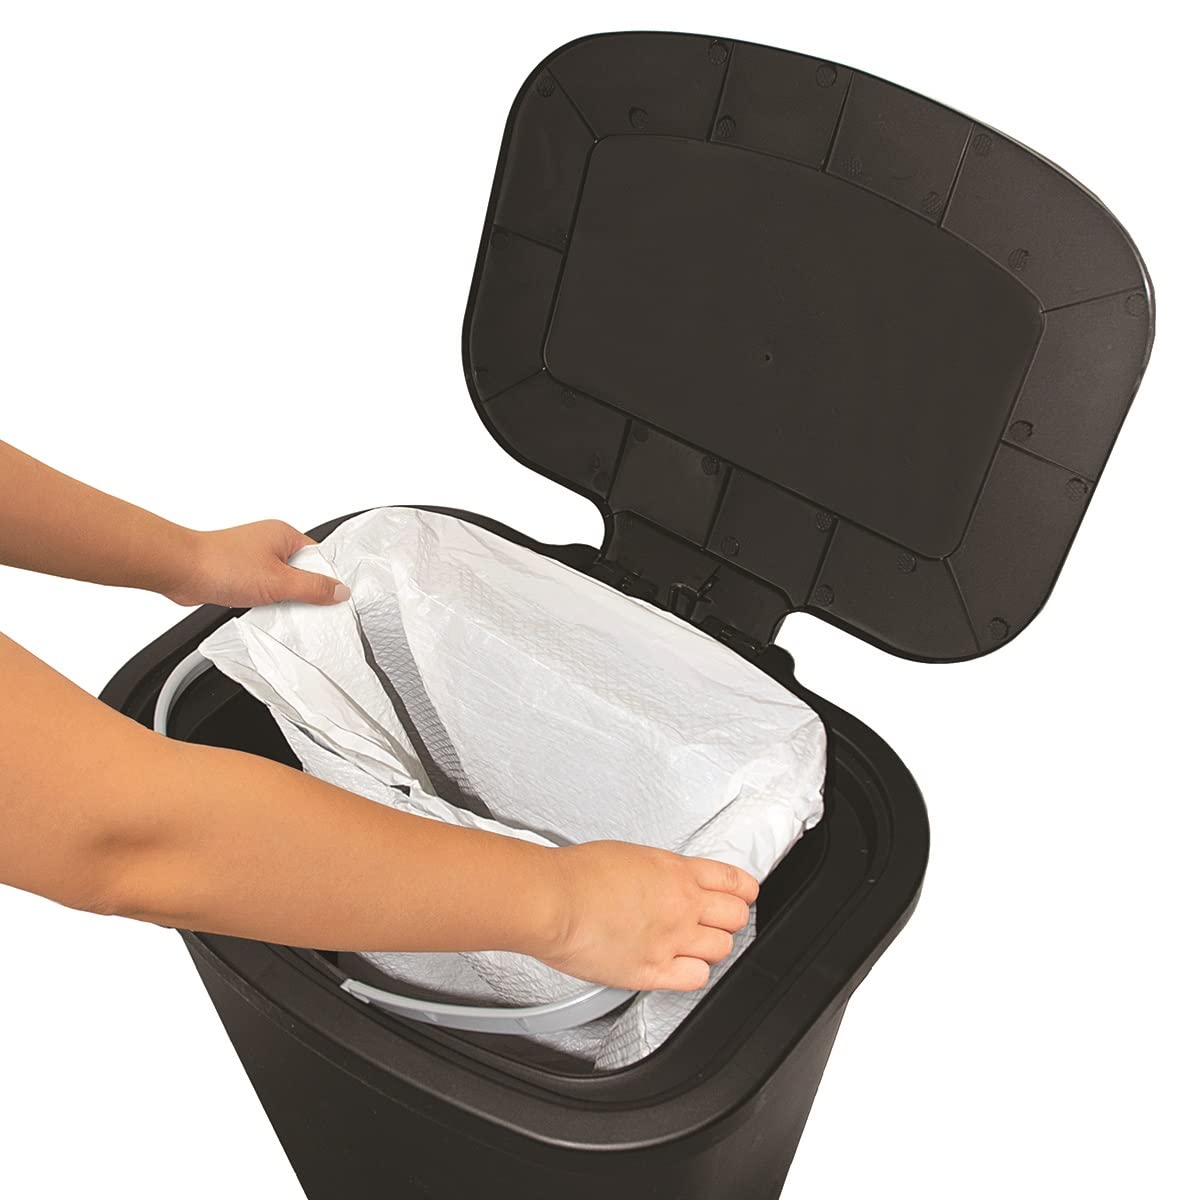 https://bigbigmart.com/wp-content/uploads/2023/10/Glad-20-Gallon-Trash-Can-Plastic-Kitchen-Waste-Bin-with-Odor-Protection-of-Lid-Hands-Free-with-Step-On-Foot-Pedal-and-Garbage-Bag-Rings-Black3.jpg